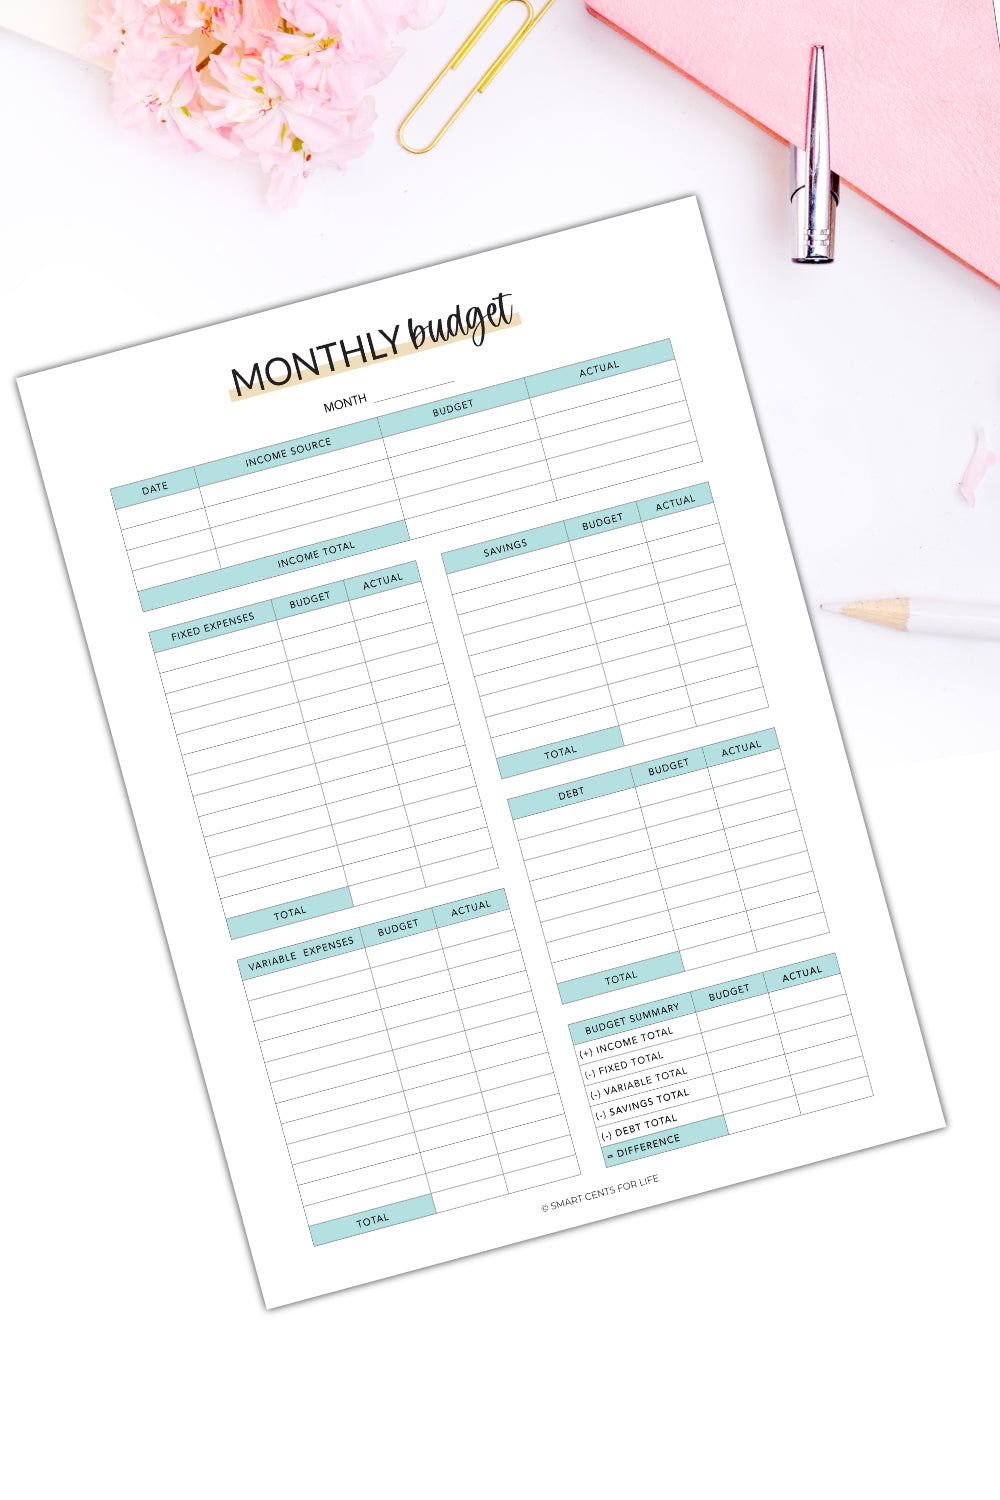 Monthly Budget Template (Printable)